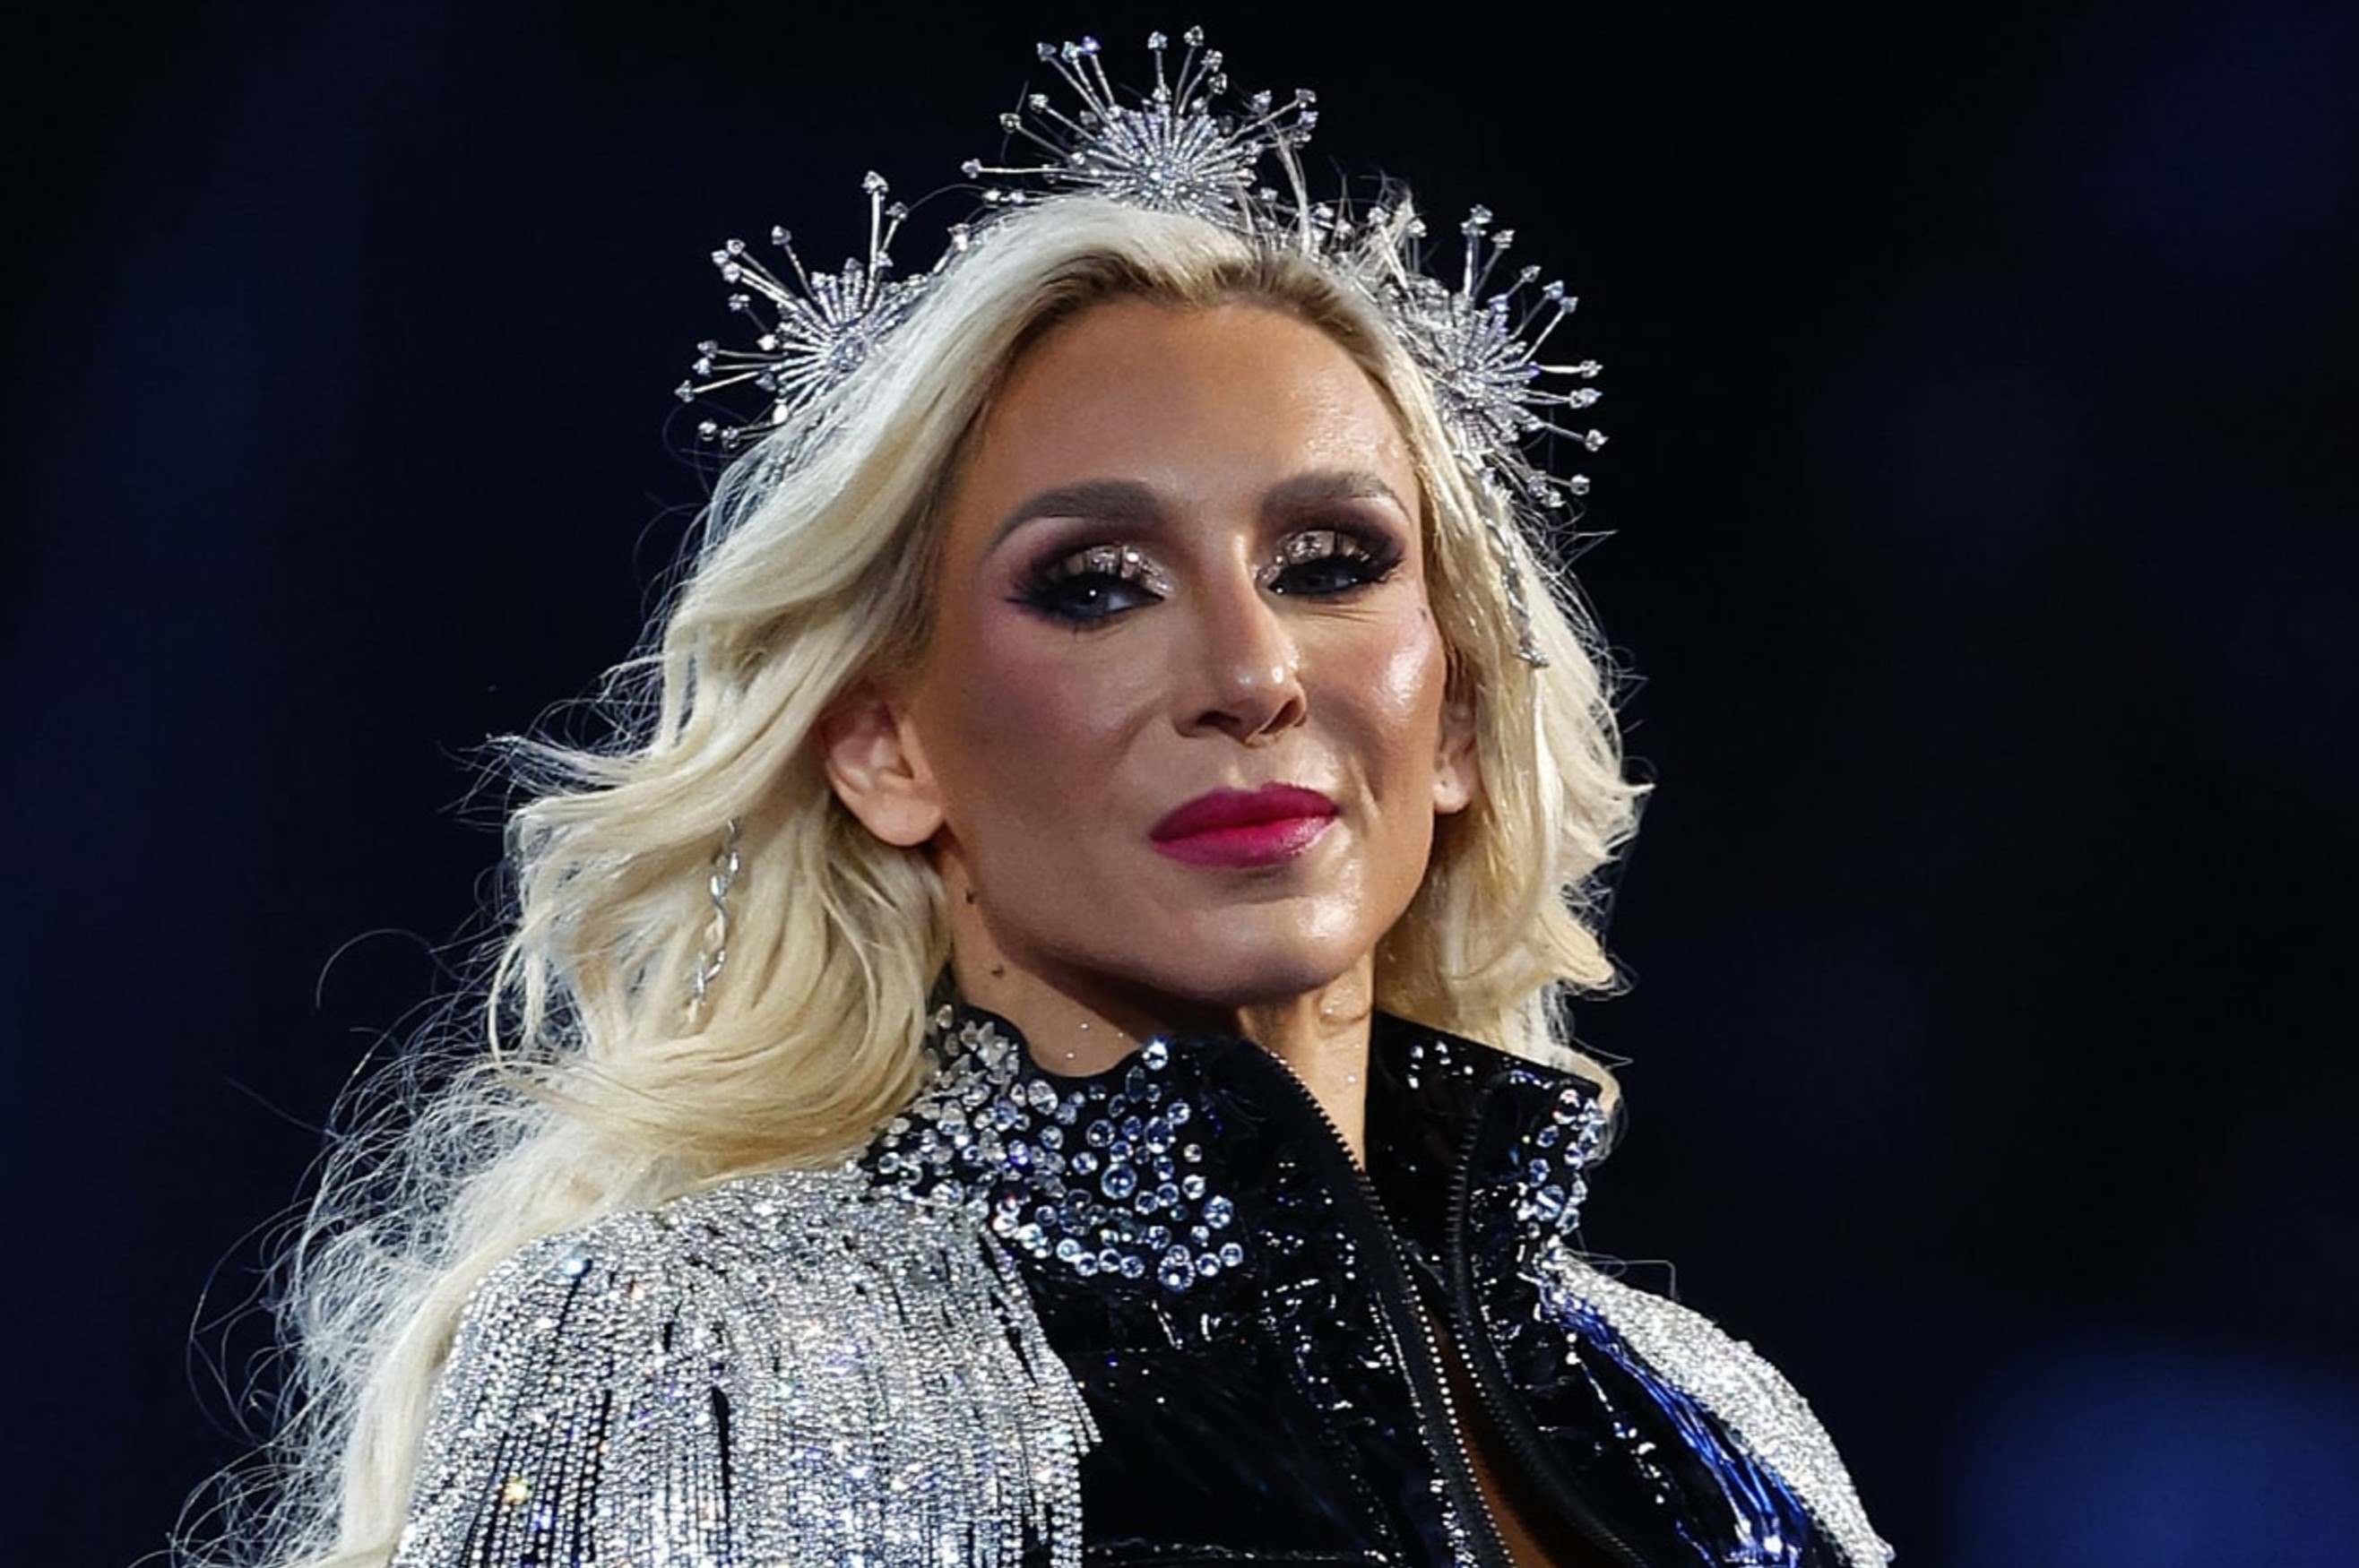 25 Captivating Facts About Charlotte Flair - Facts.net